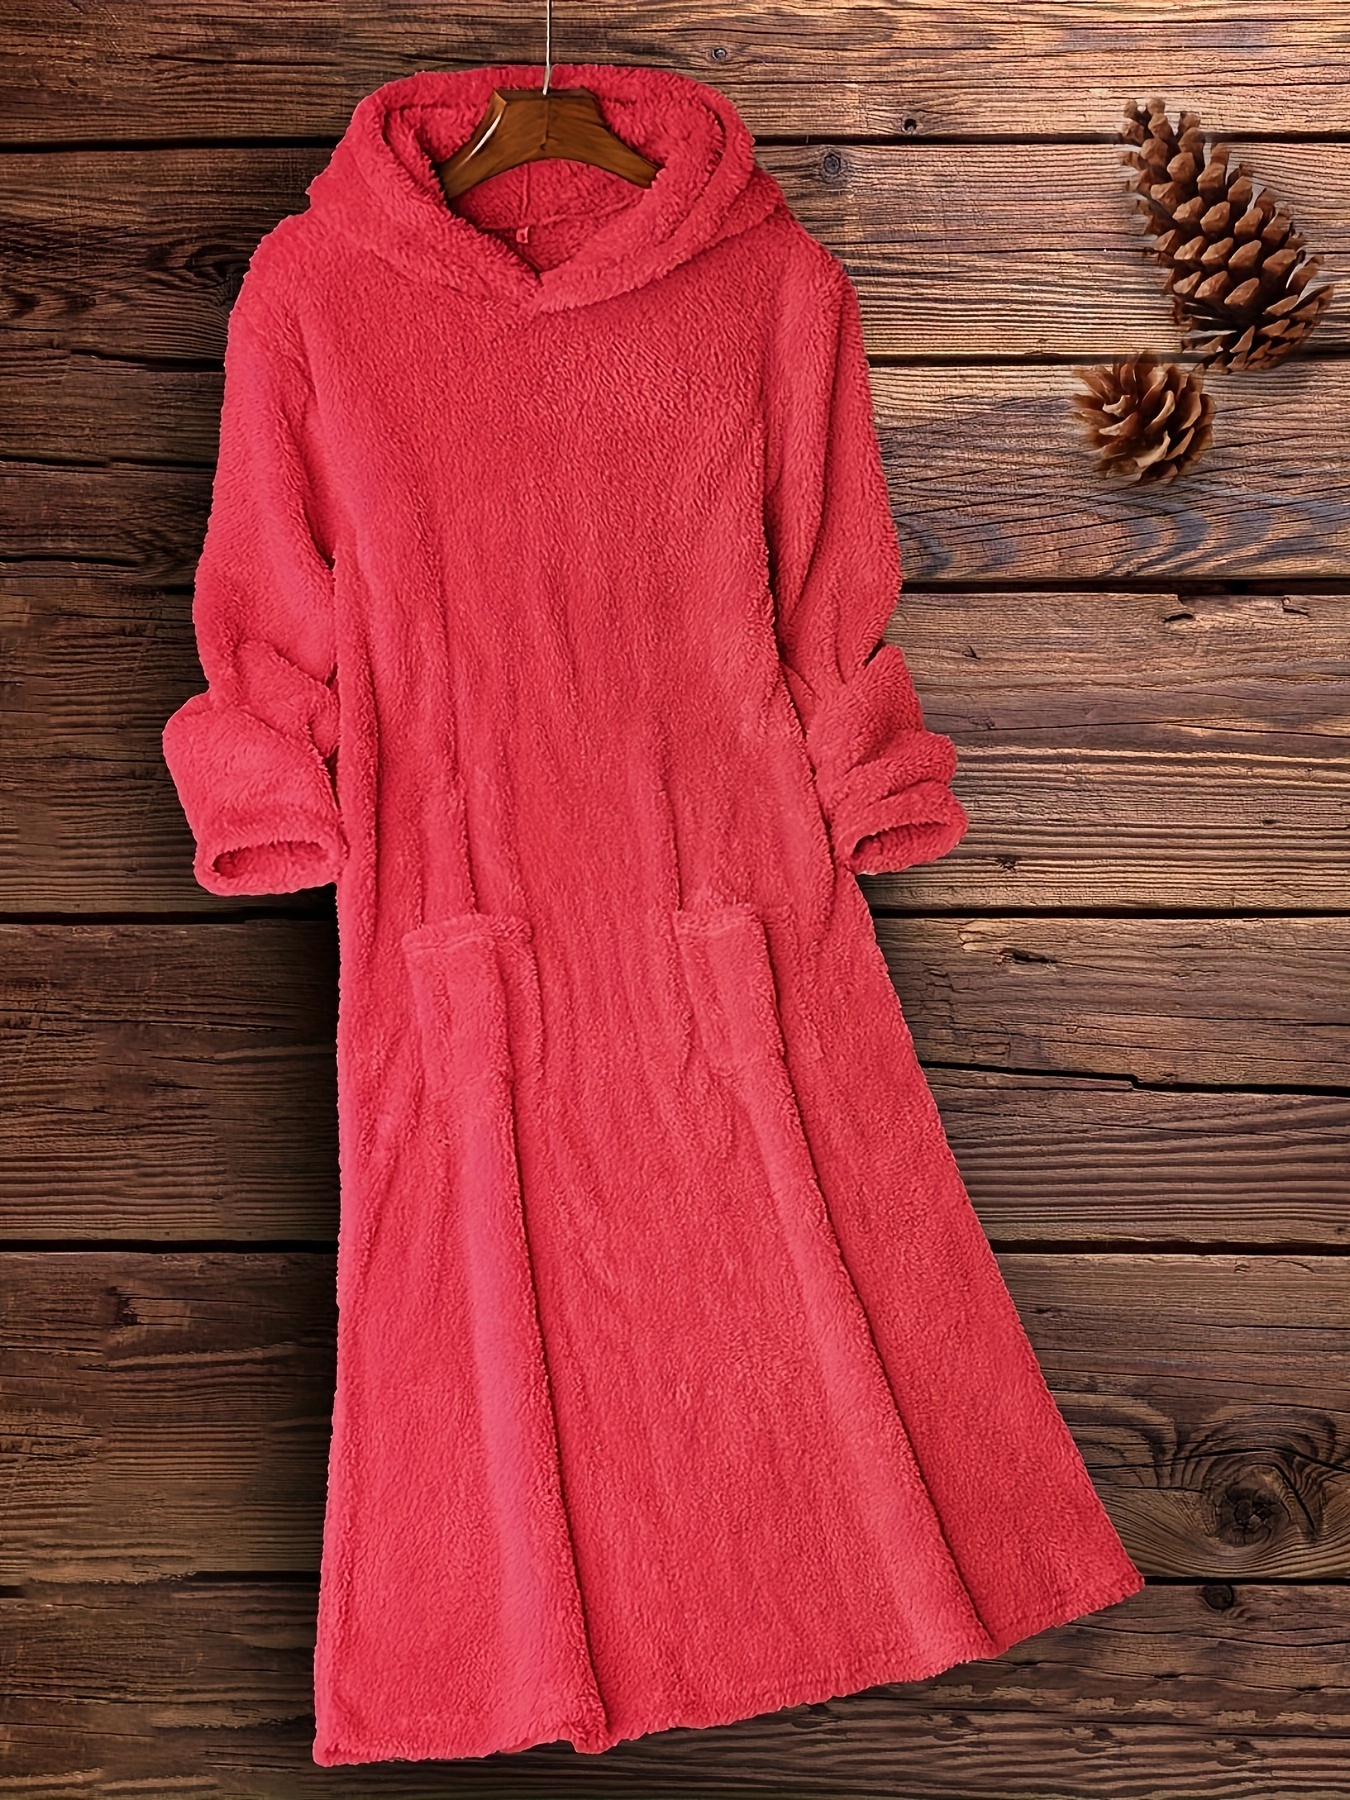 fuzzy hooded midi dress casual pocket front solid long sleeve dress womens clothing details 1